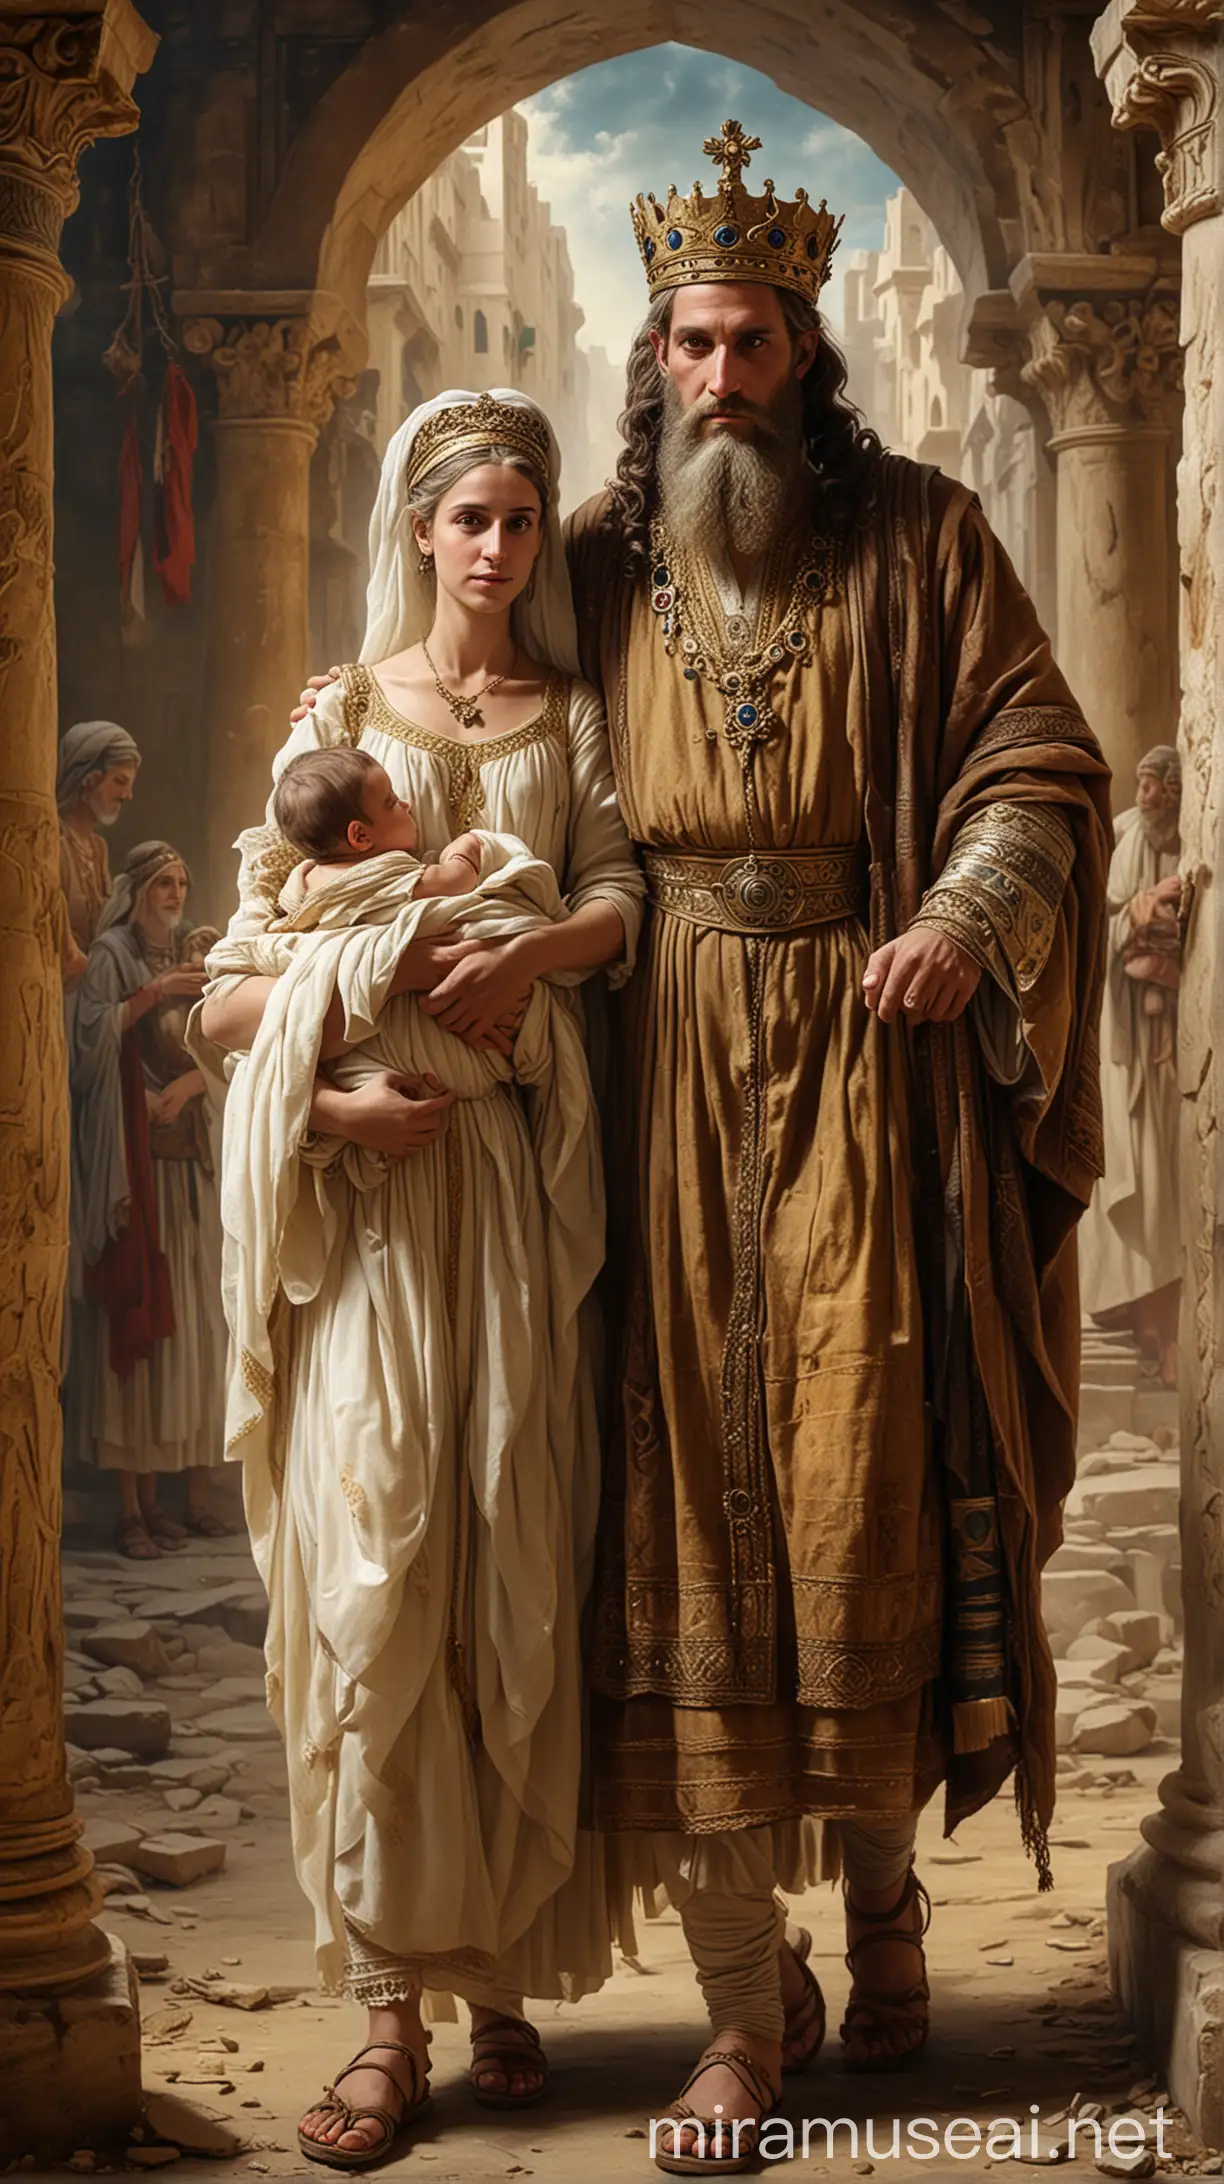 Jewish King and Queen Carrying Child in Ancient World